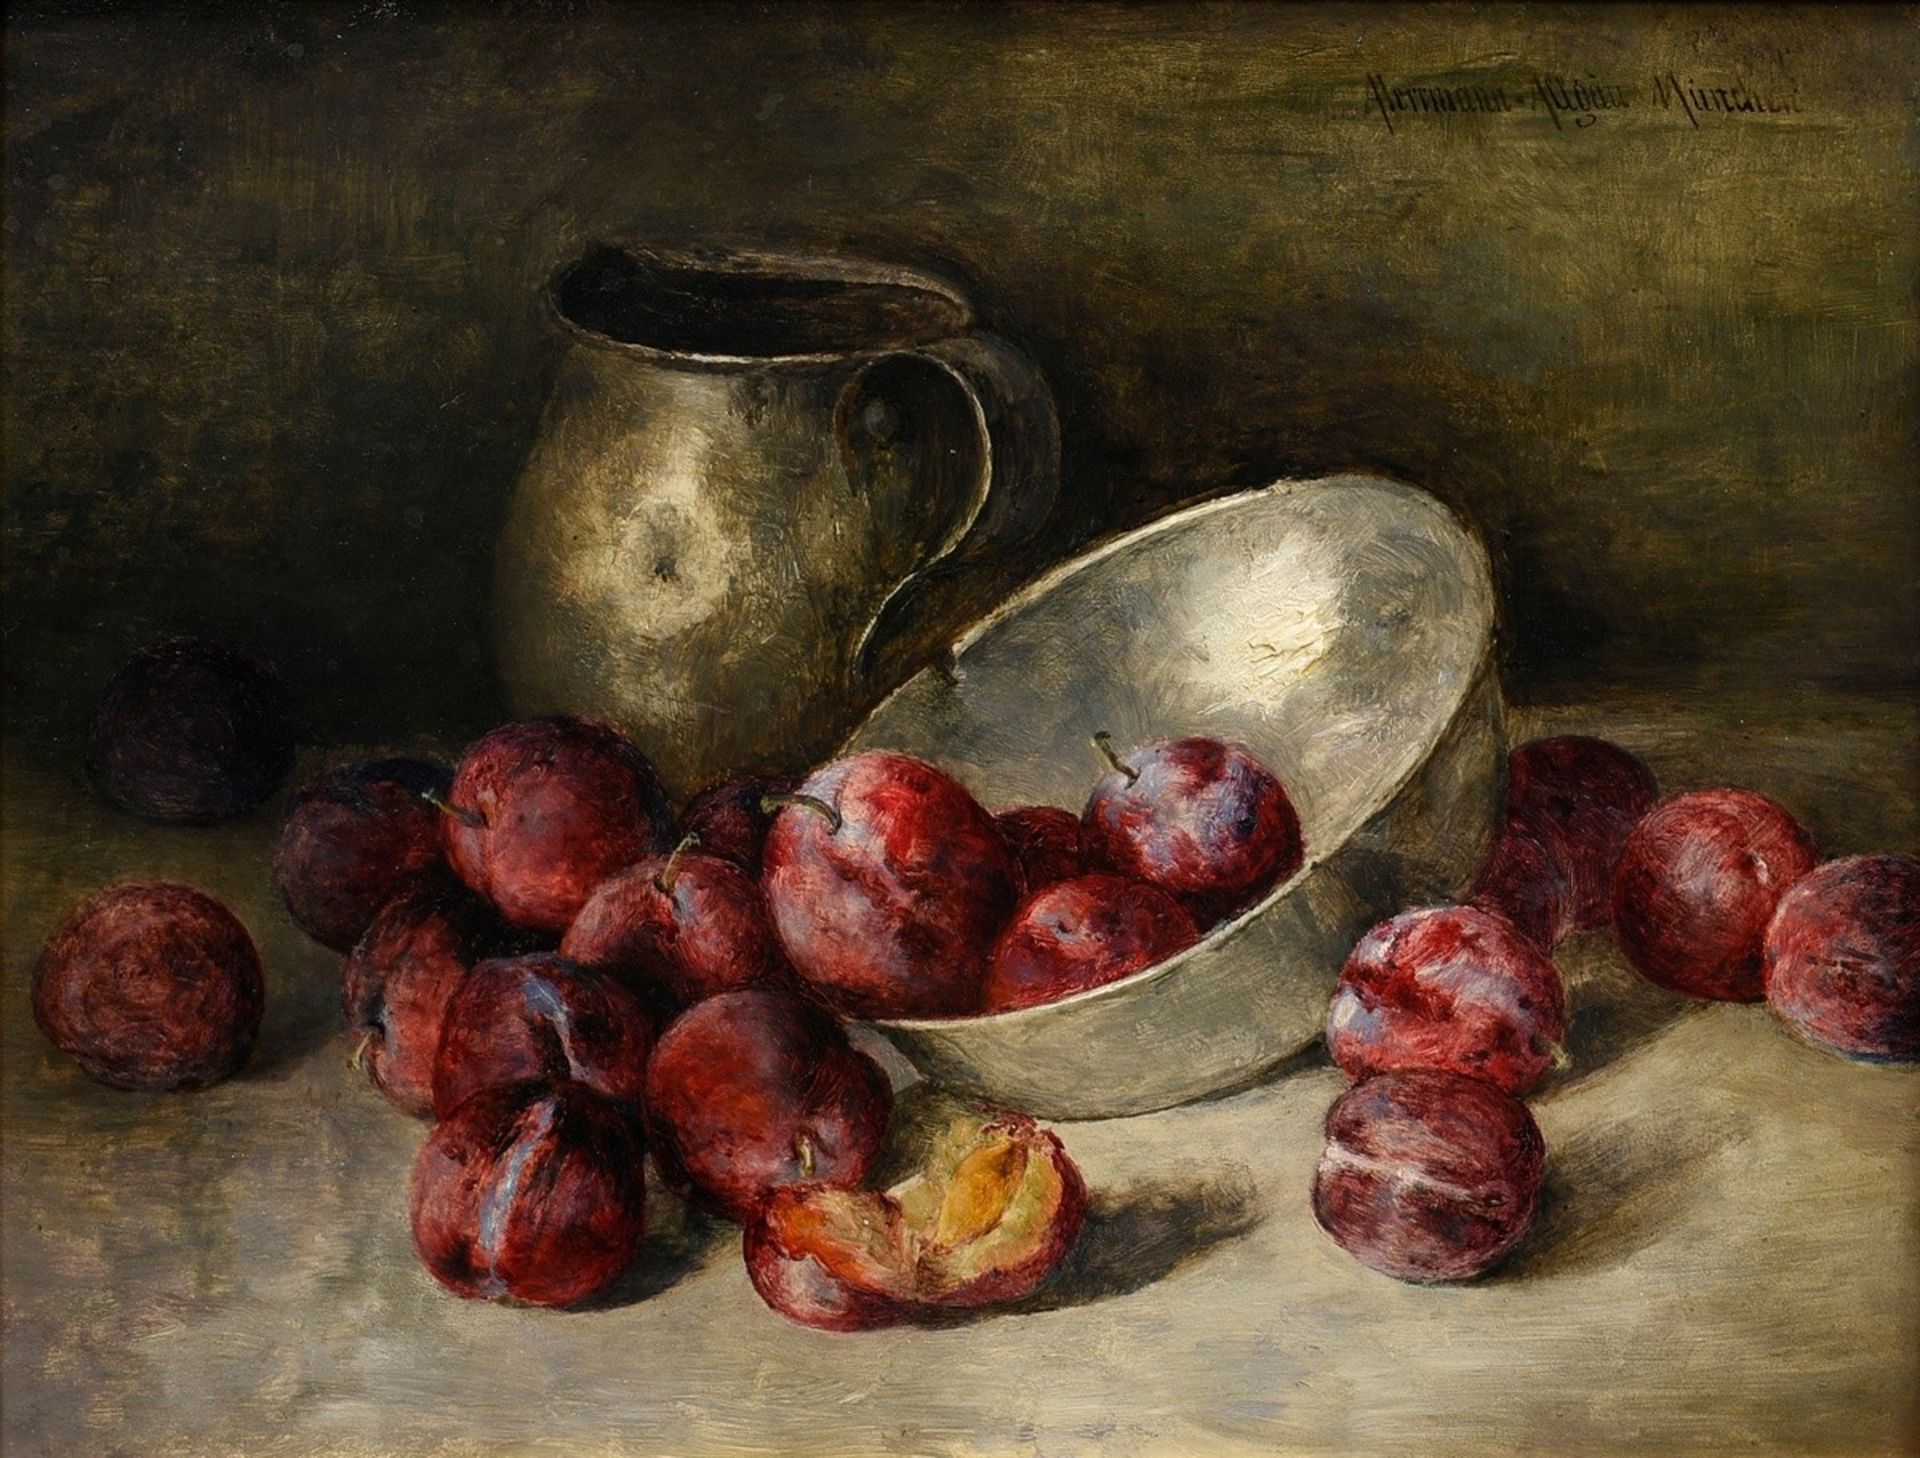 Hermann-Allgäu, August (1852-1916) "Still life with plums and pewter dishes", oil/wood, sign. t.r.,